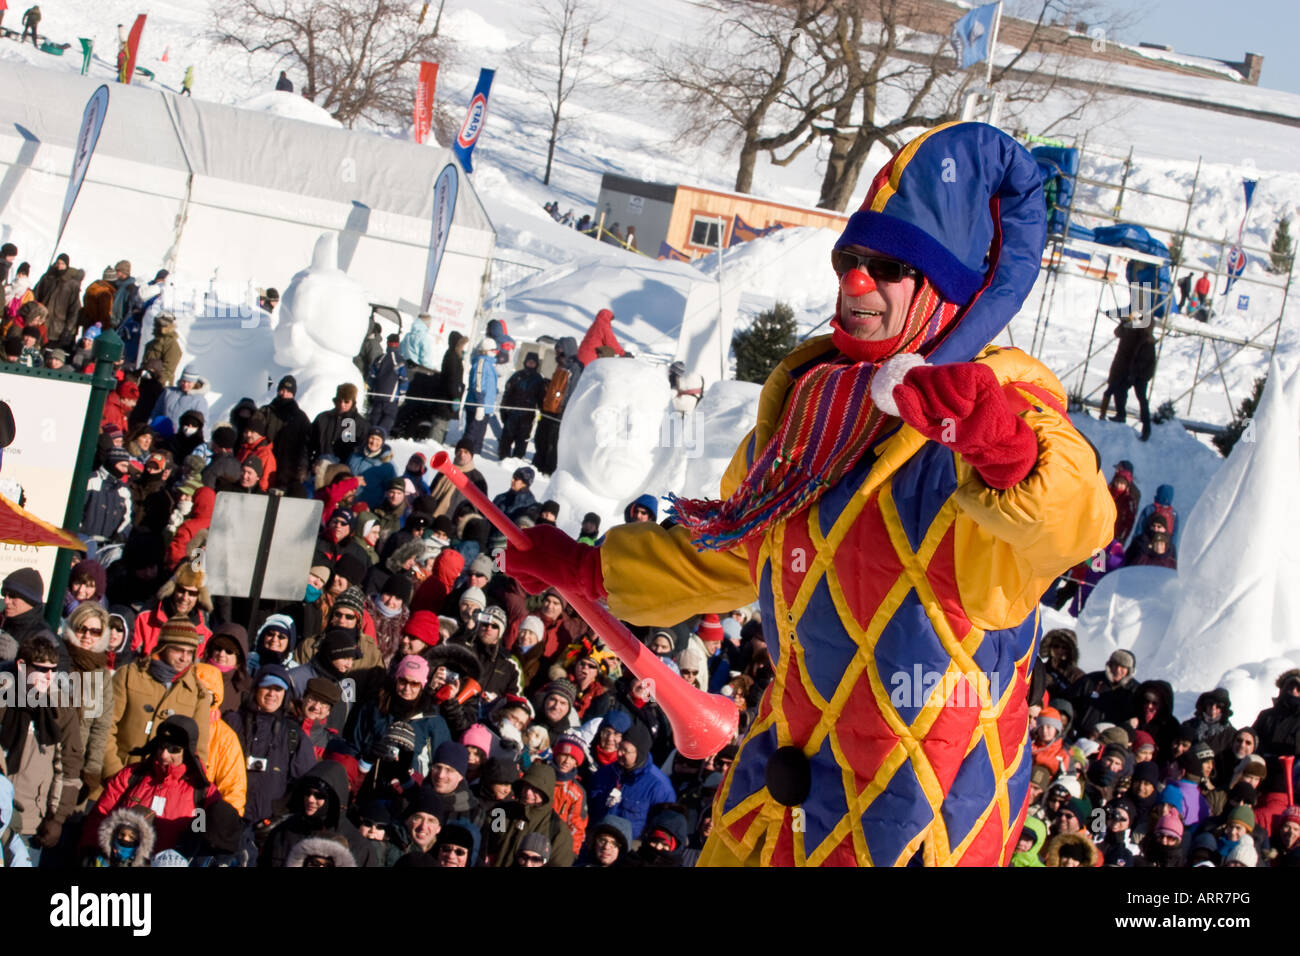 A Knuk, one of Bonhomme Carnaval's friend gestures during the annual Snow Bath an highlight of the Quebec Winter Carnival. Stock Photo